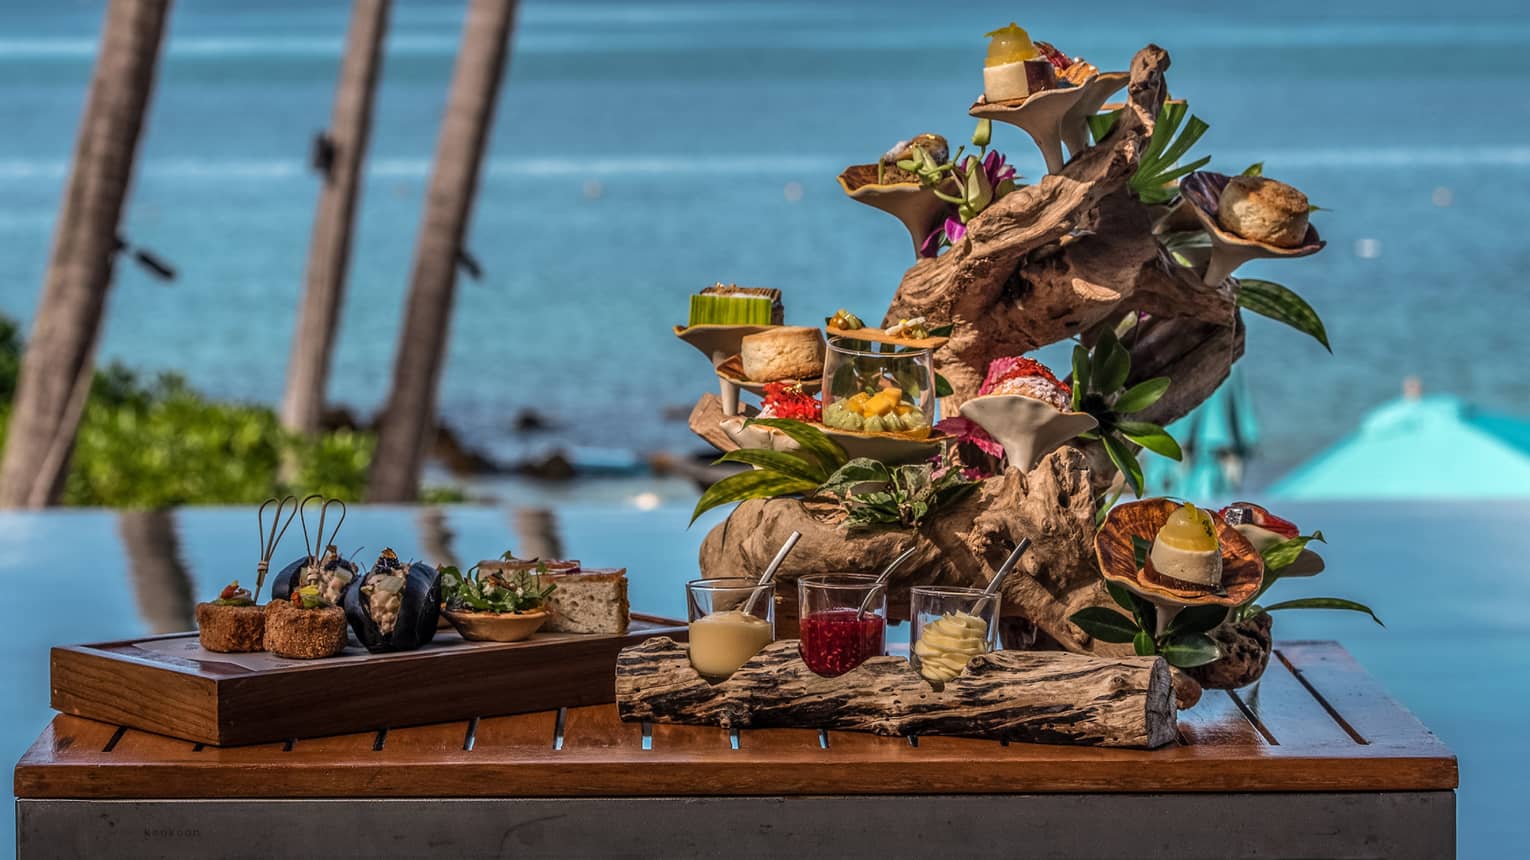 Colourful sweets and spreads arranged on sculpted, tiered driftwood on a teak table, ocean view in the background.